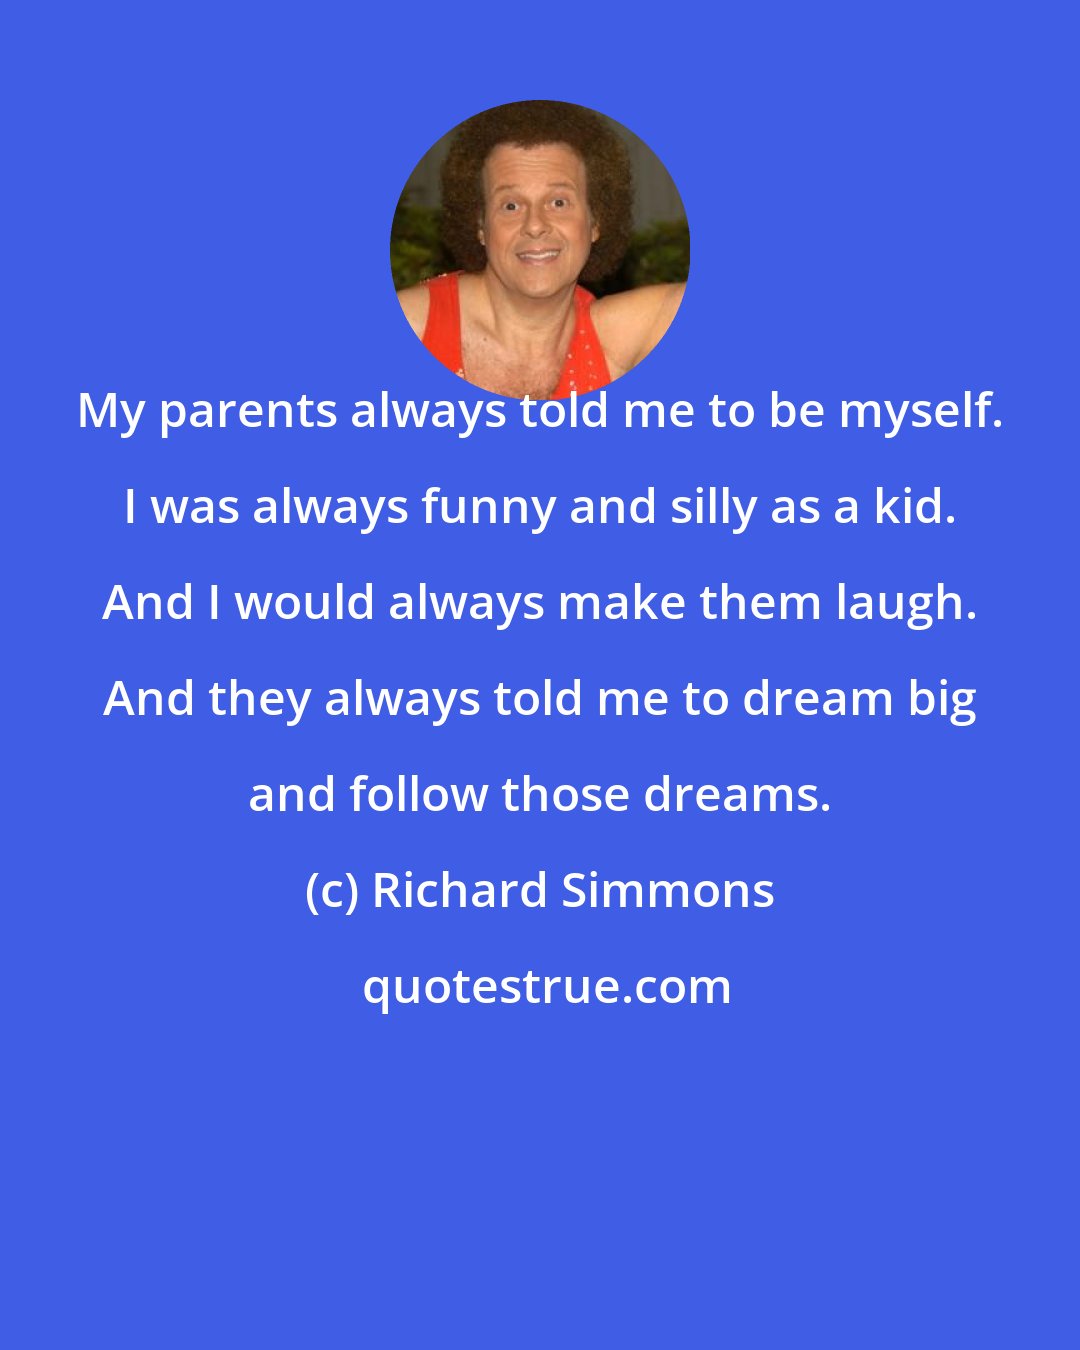 Richard Simmons: My parents always told me to be myself. I was always funny and silly as a kid. And I would always make them laugh. And they always told me to dream big and follow those dreams.